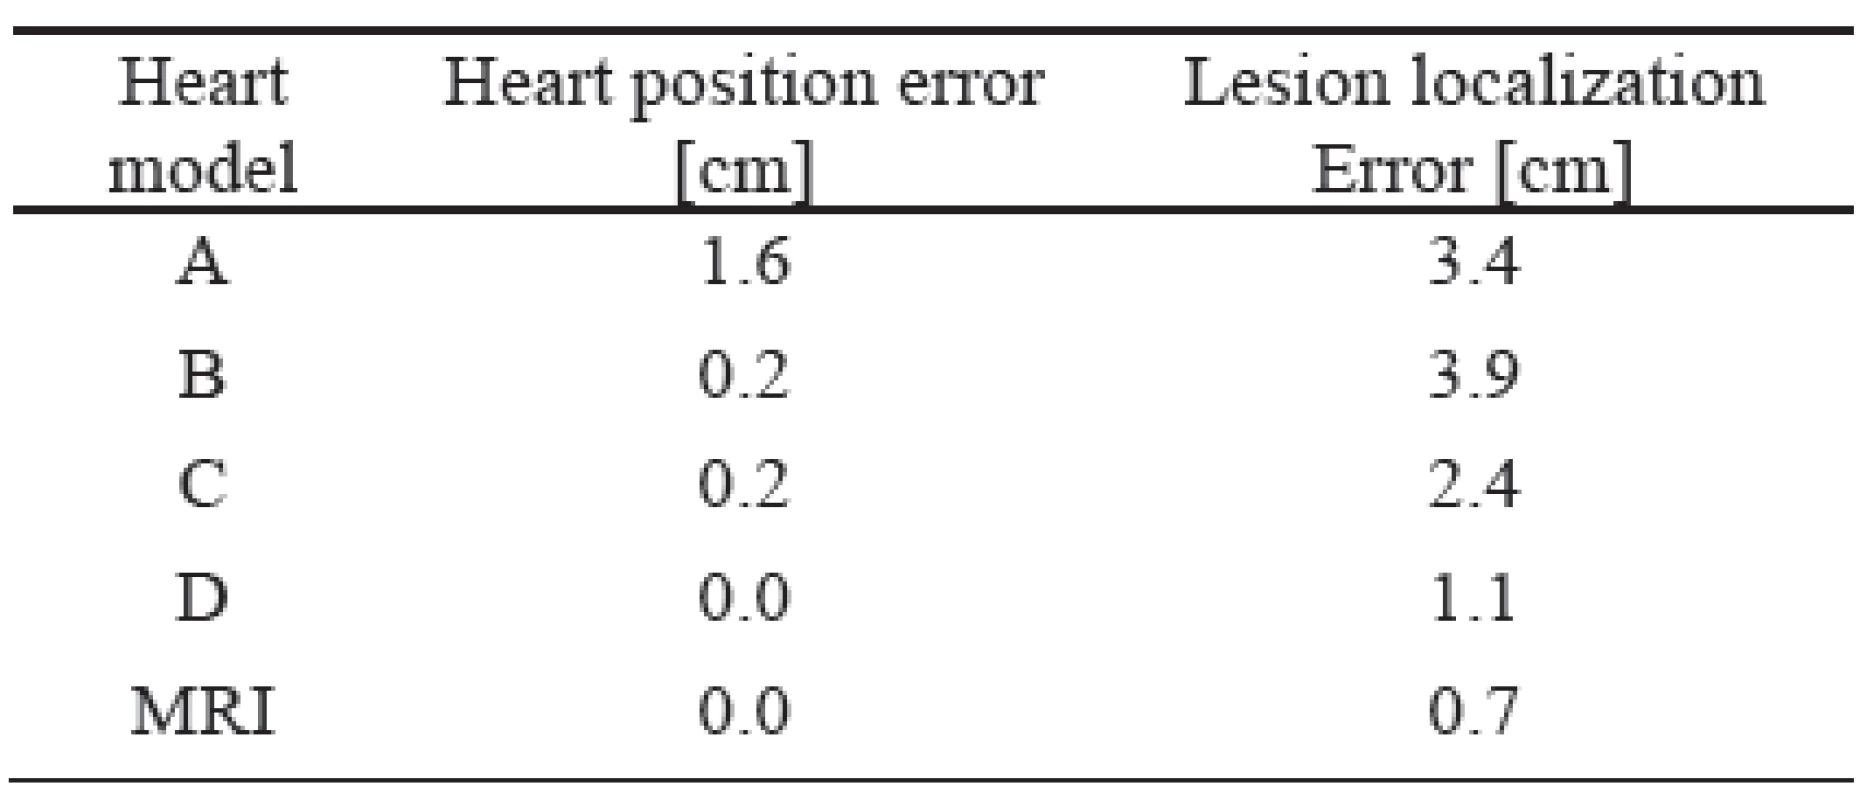 Mean heart position error and lesion localization errors for the tested heart models.